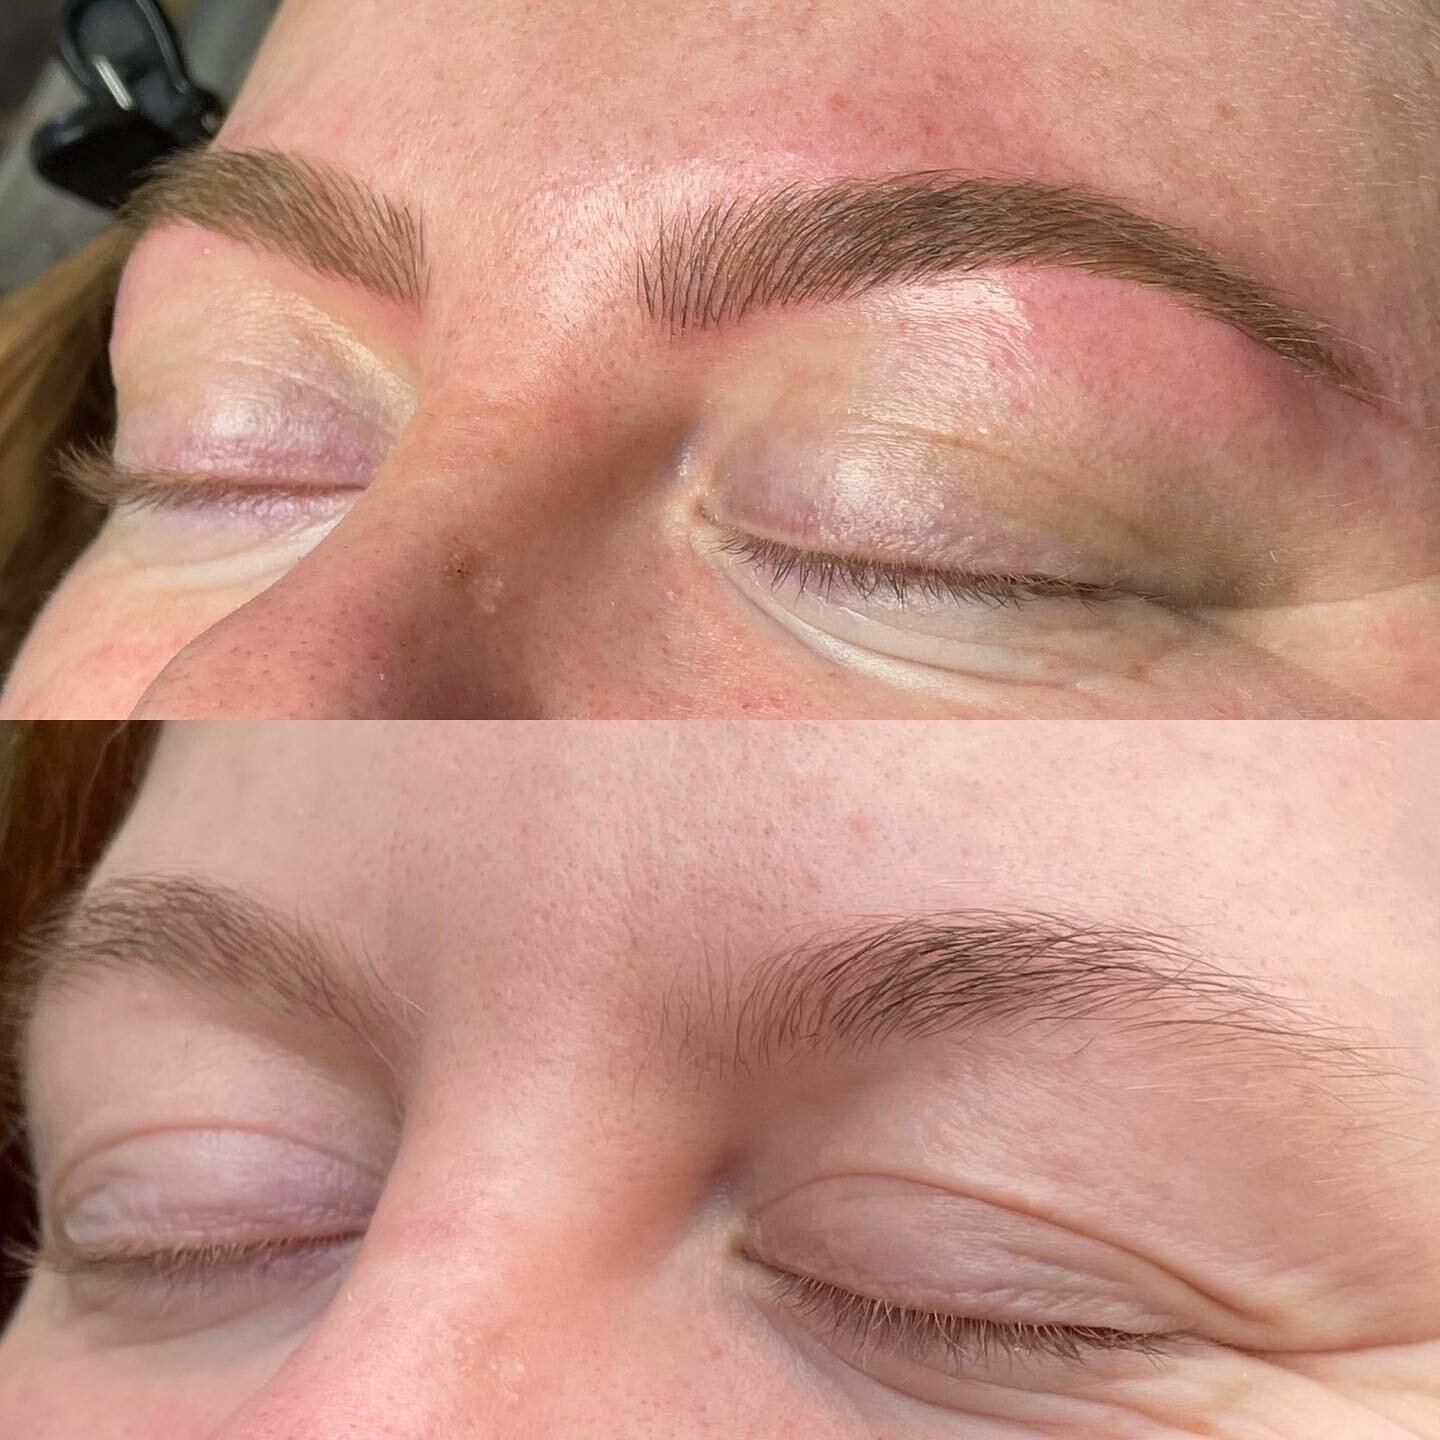 Microblading with shading aka combination brow.

Microblading can be super natural and does heal lighter and slightly cooler than what is shown here. I always advise customers to play it safe with their first treatment to ease them in and then for th